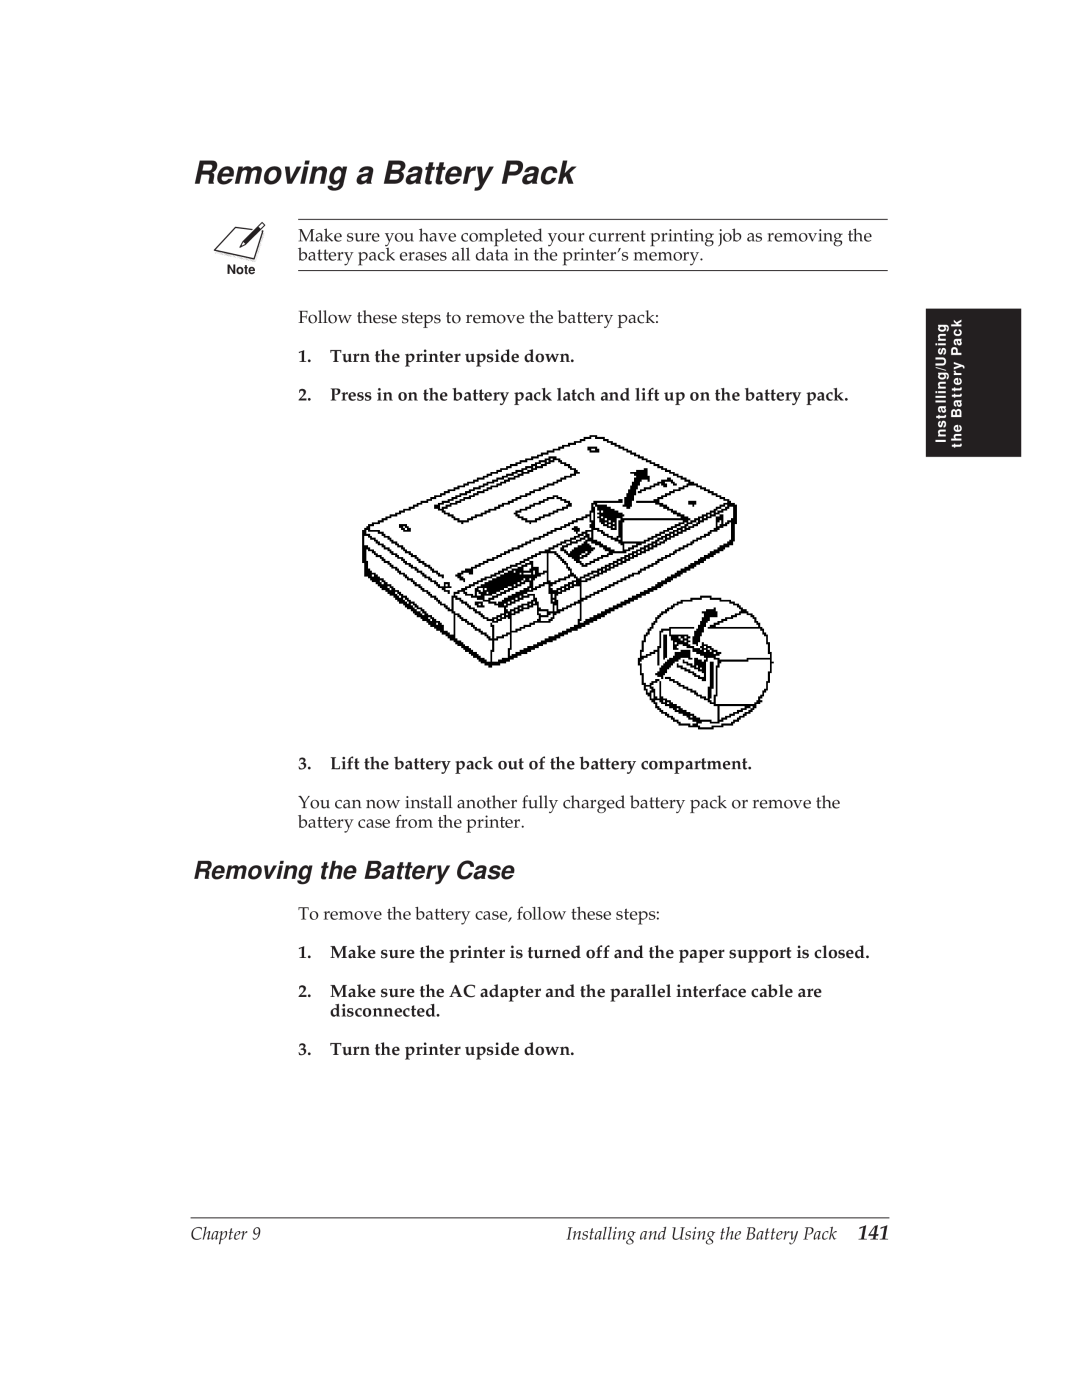 Canon BJ-30 manual Removing a Battery Pack, Removing the Battery Case, Turn the printer upside down 